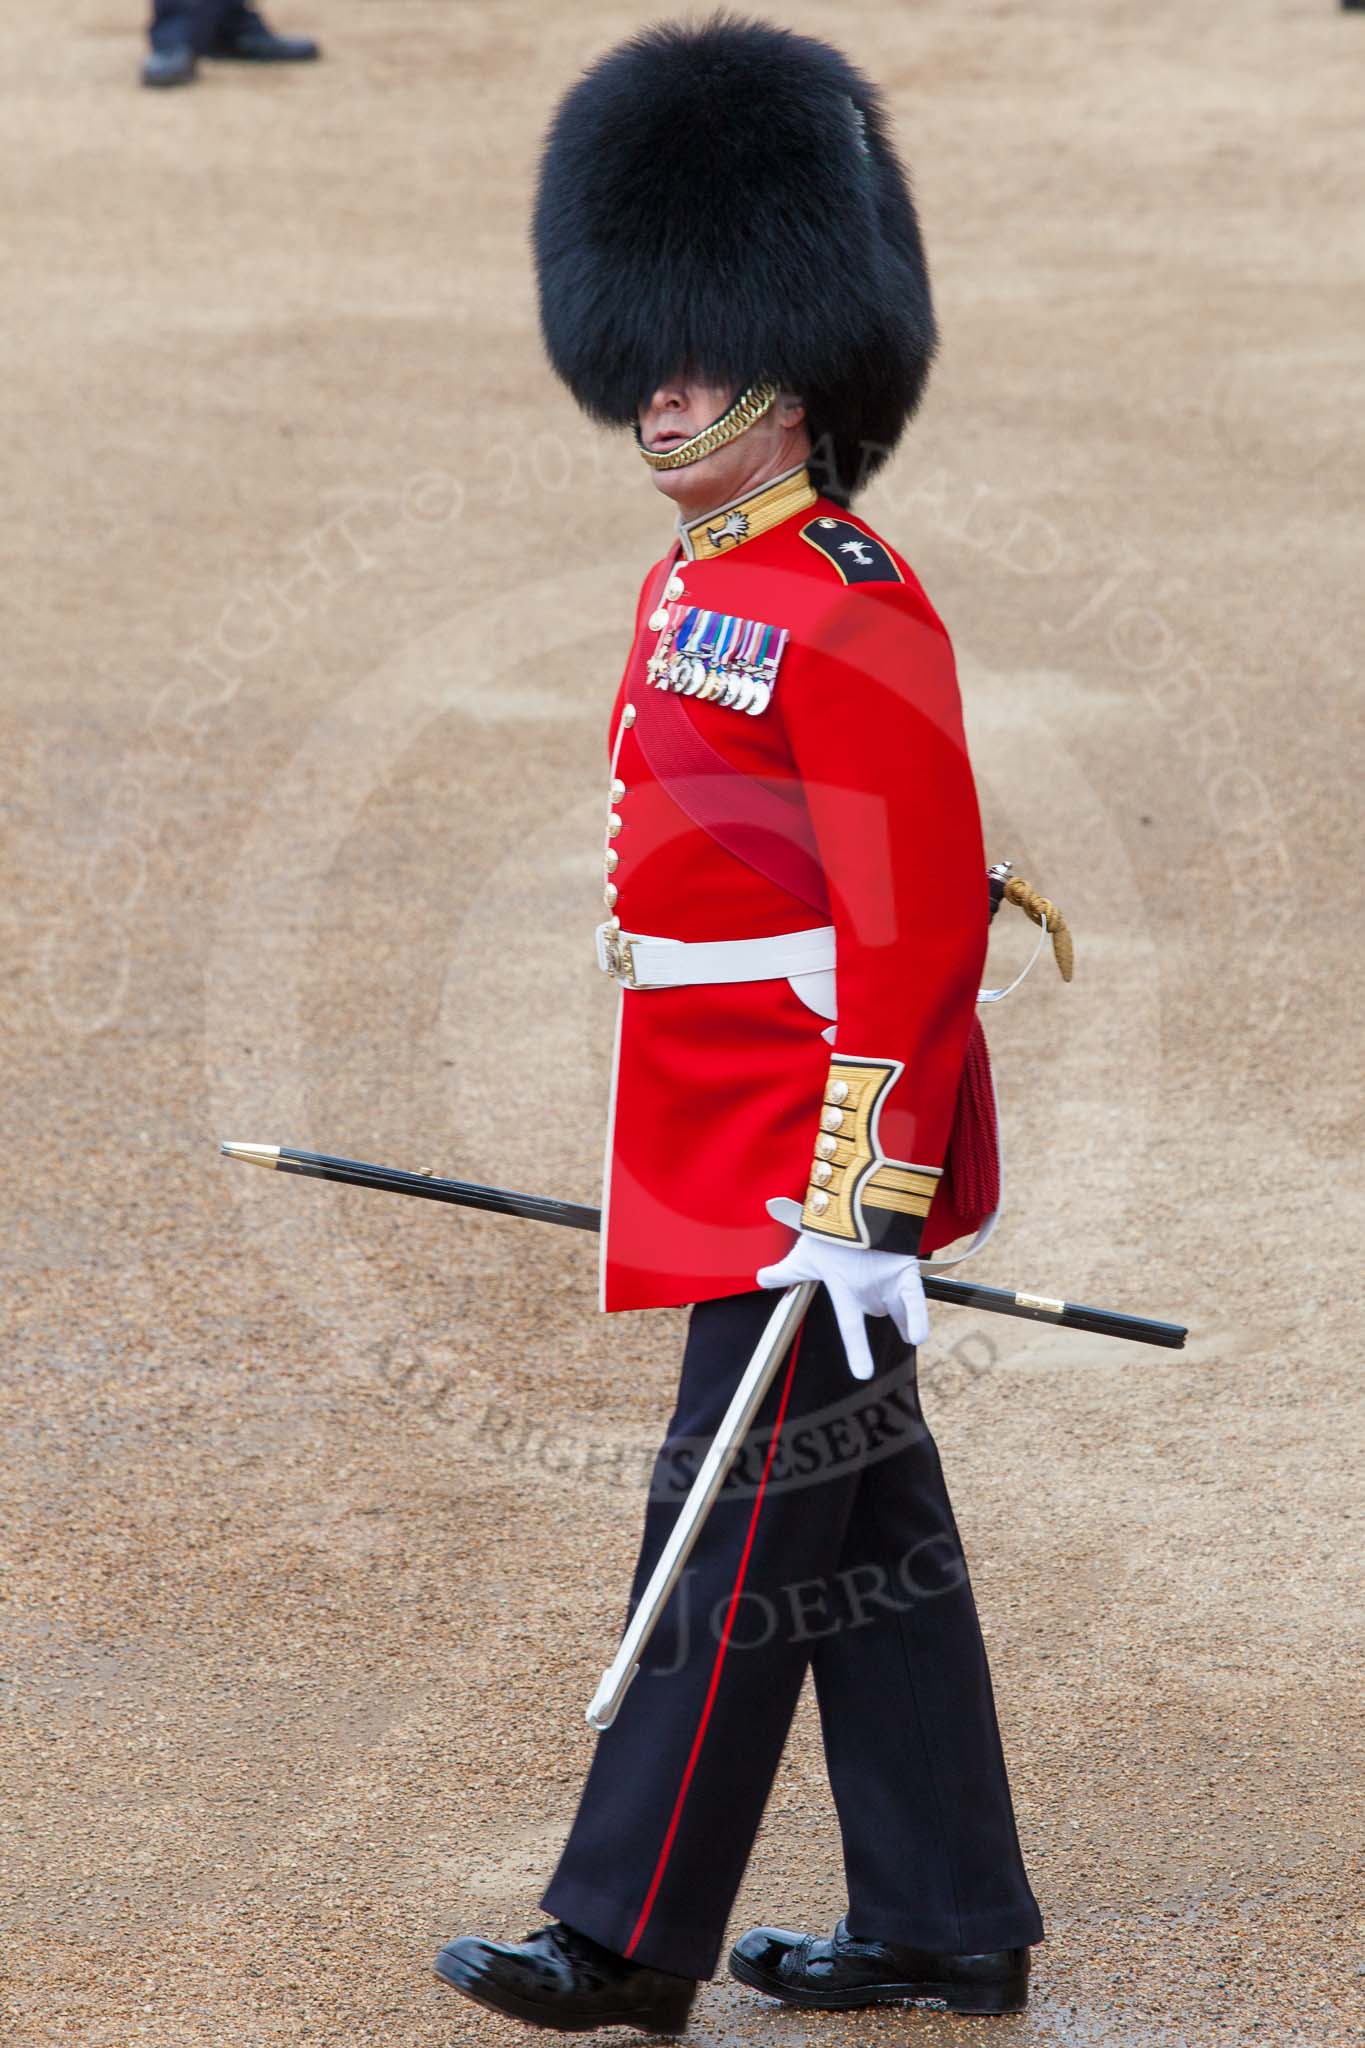 The Colonel's Review 2013.
Horse Guards Parade, Westminster,
London SW1,

United Kingdom,
on 08 June 2013 at 10:05, image #34